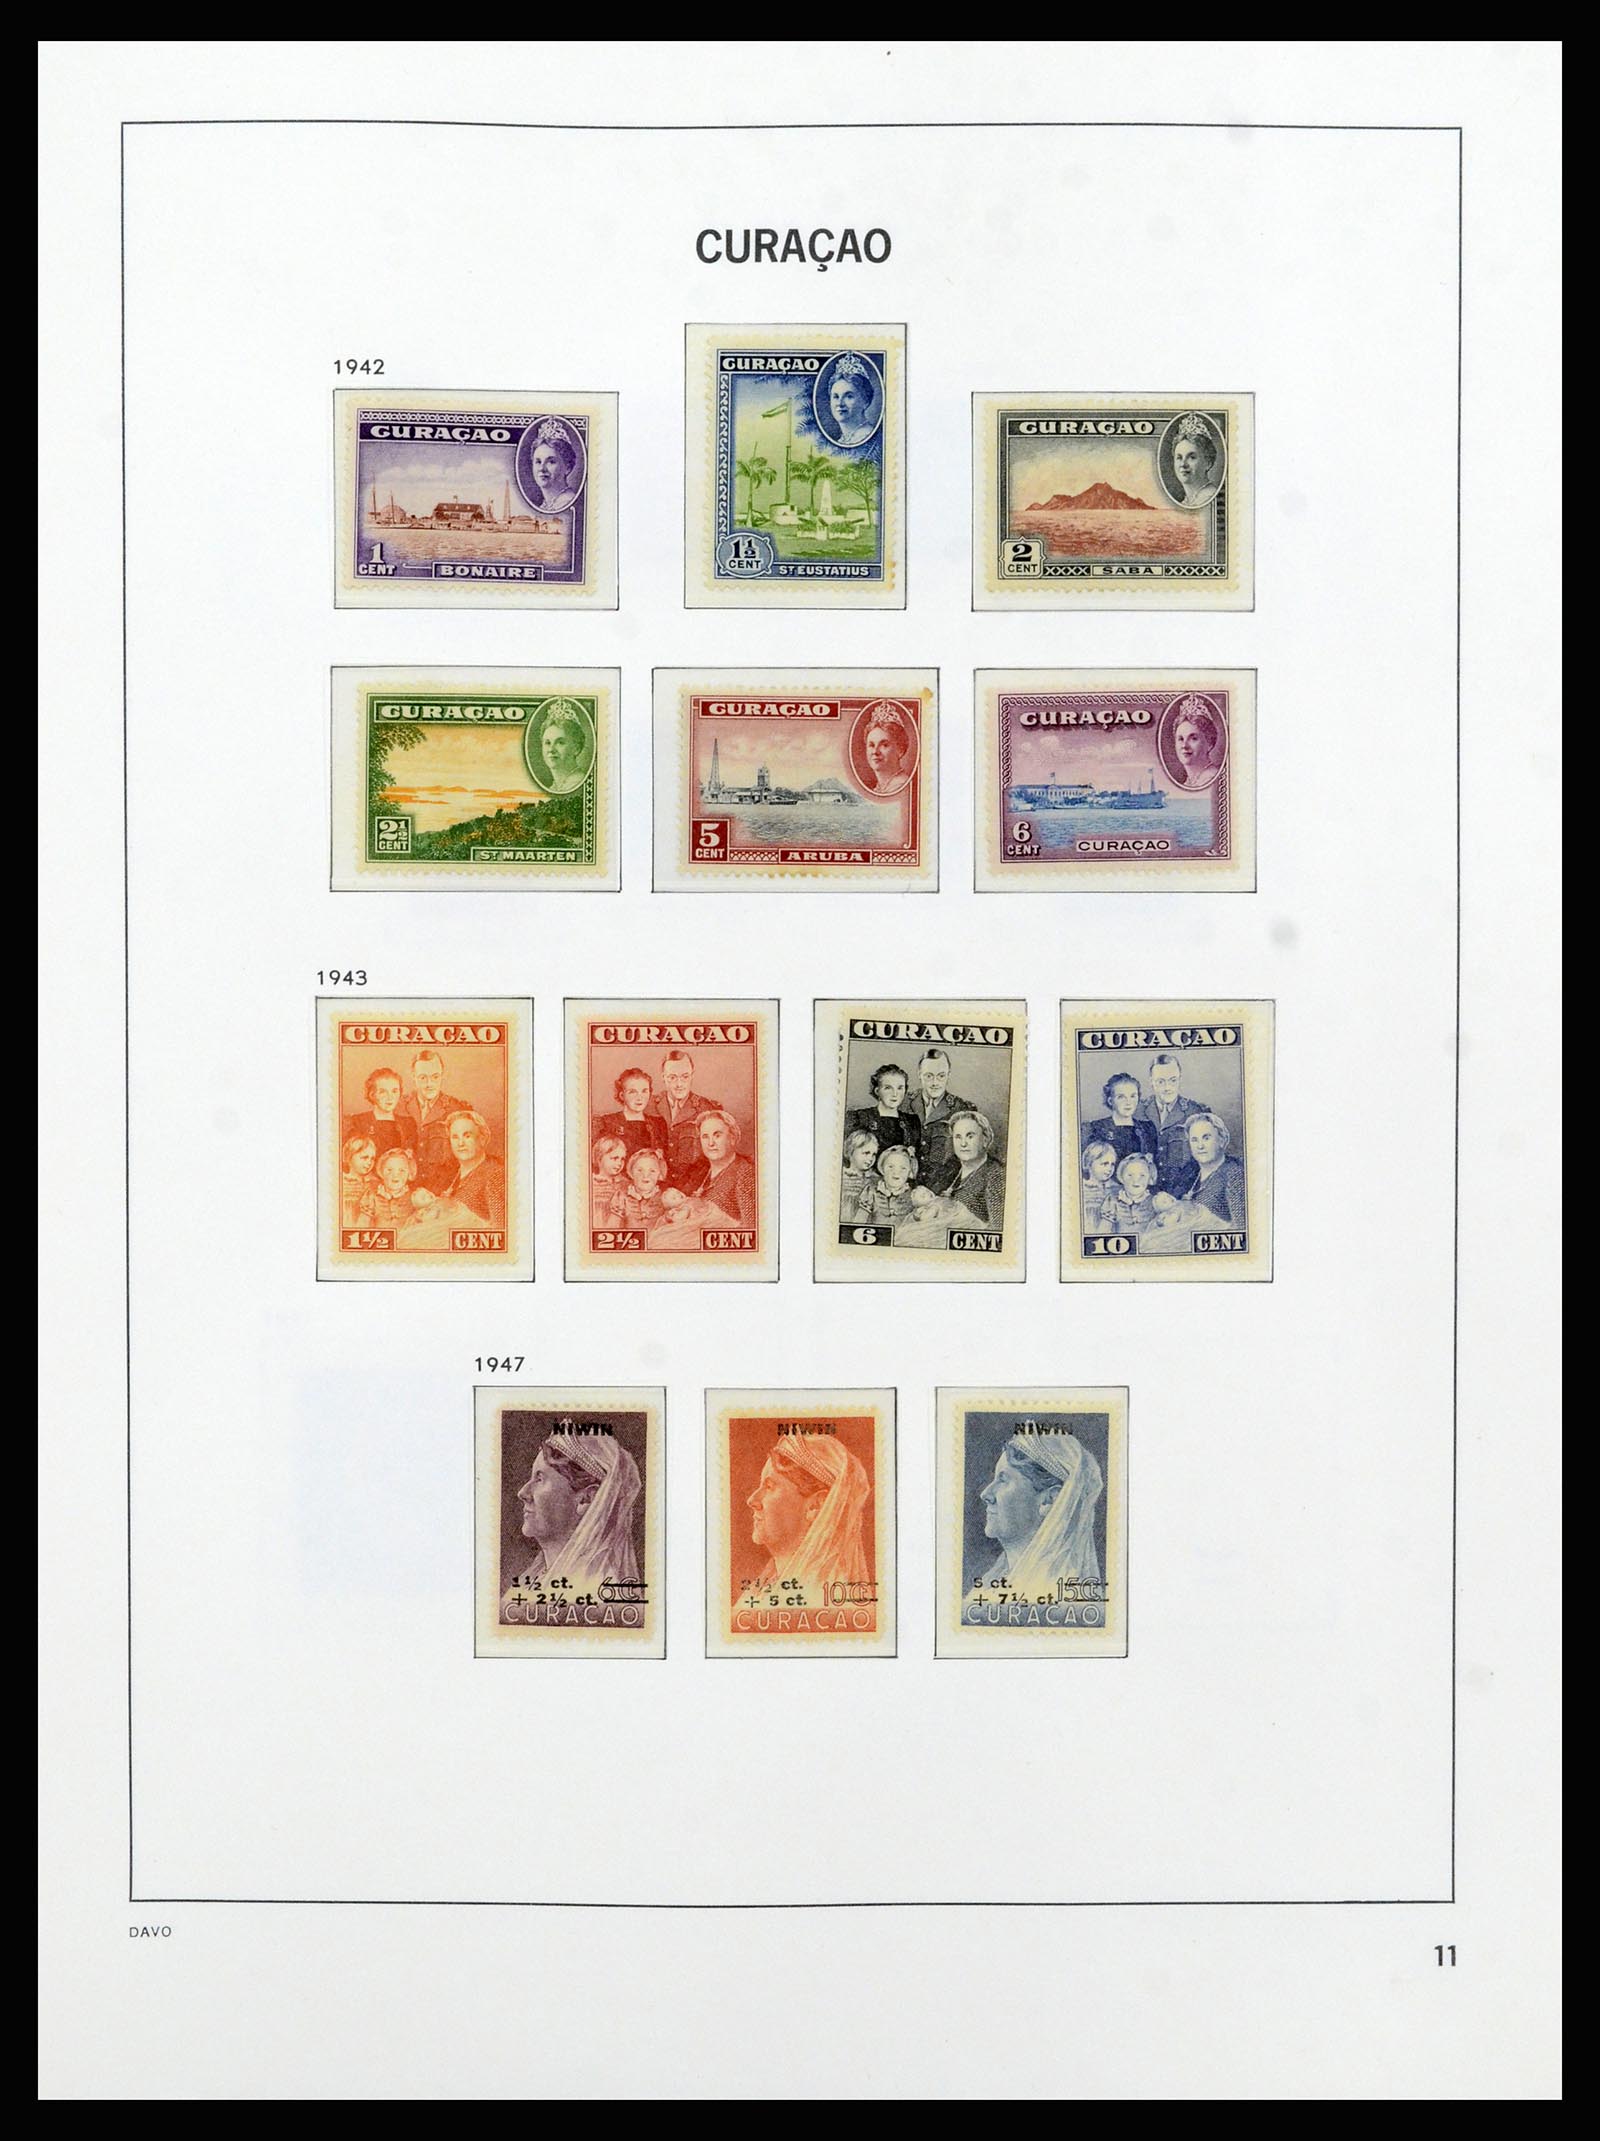 37182 011 - Stamp collection 37182 Curaçao and Dutch Antilles 1873-2010.